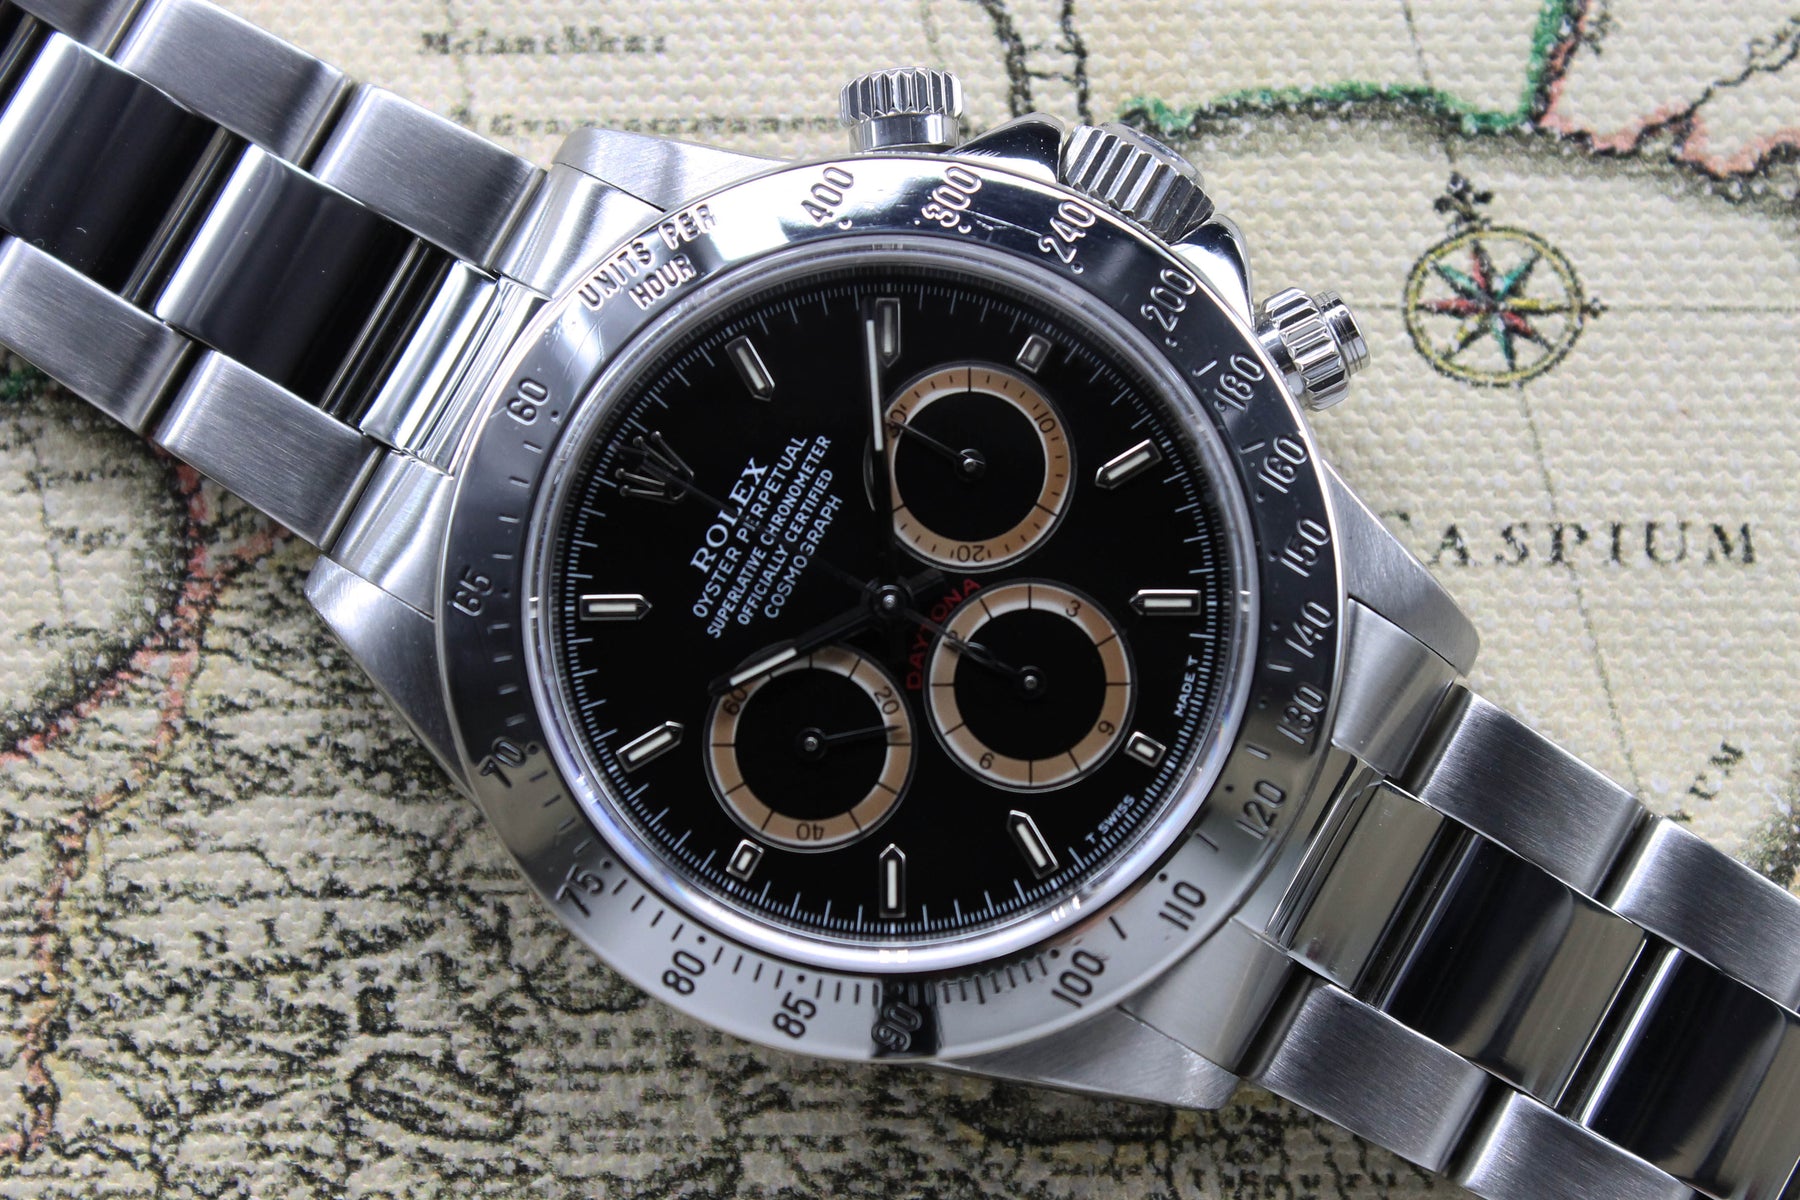 1992 Rolex Daytona Patrizzi Inverted 6 Ref. 16520 (with Box & RSC from 1999)